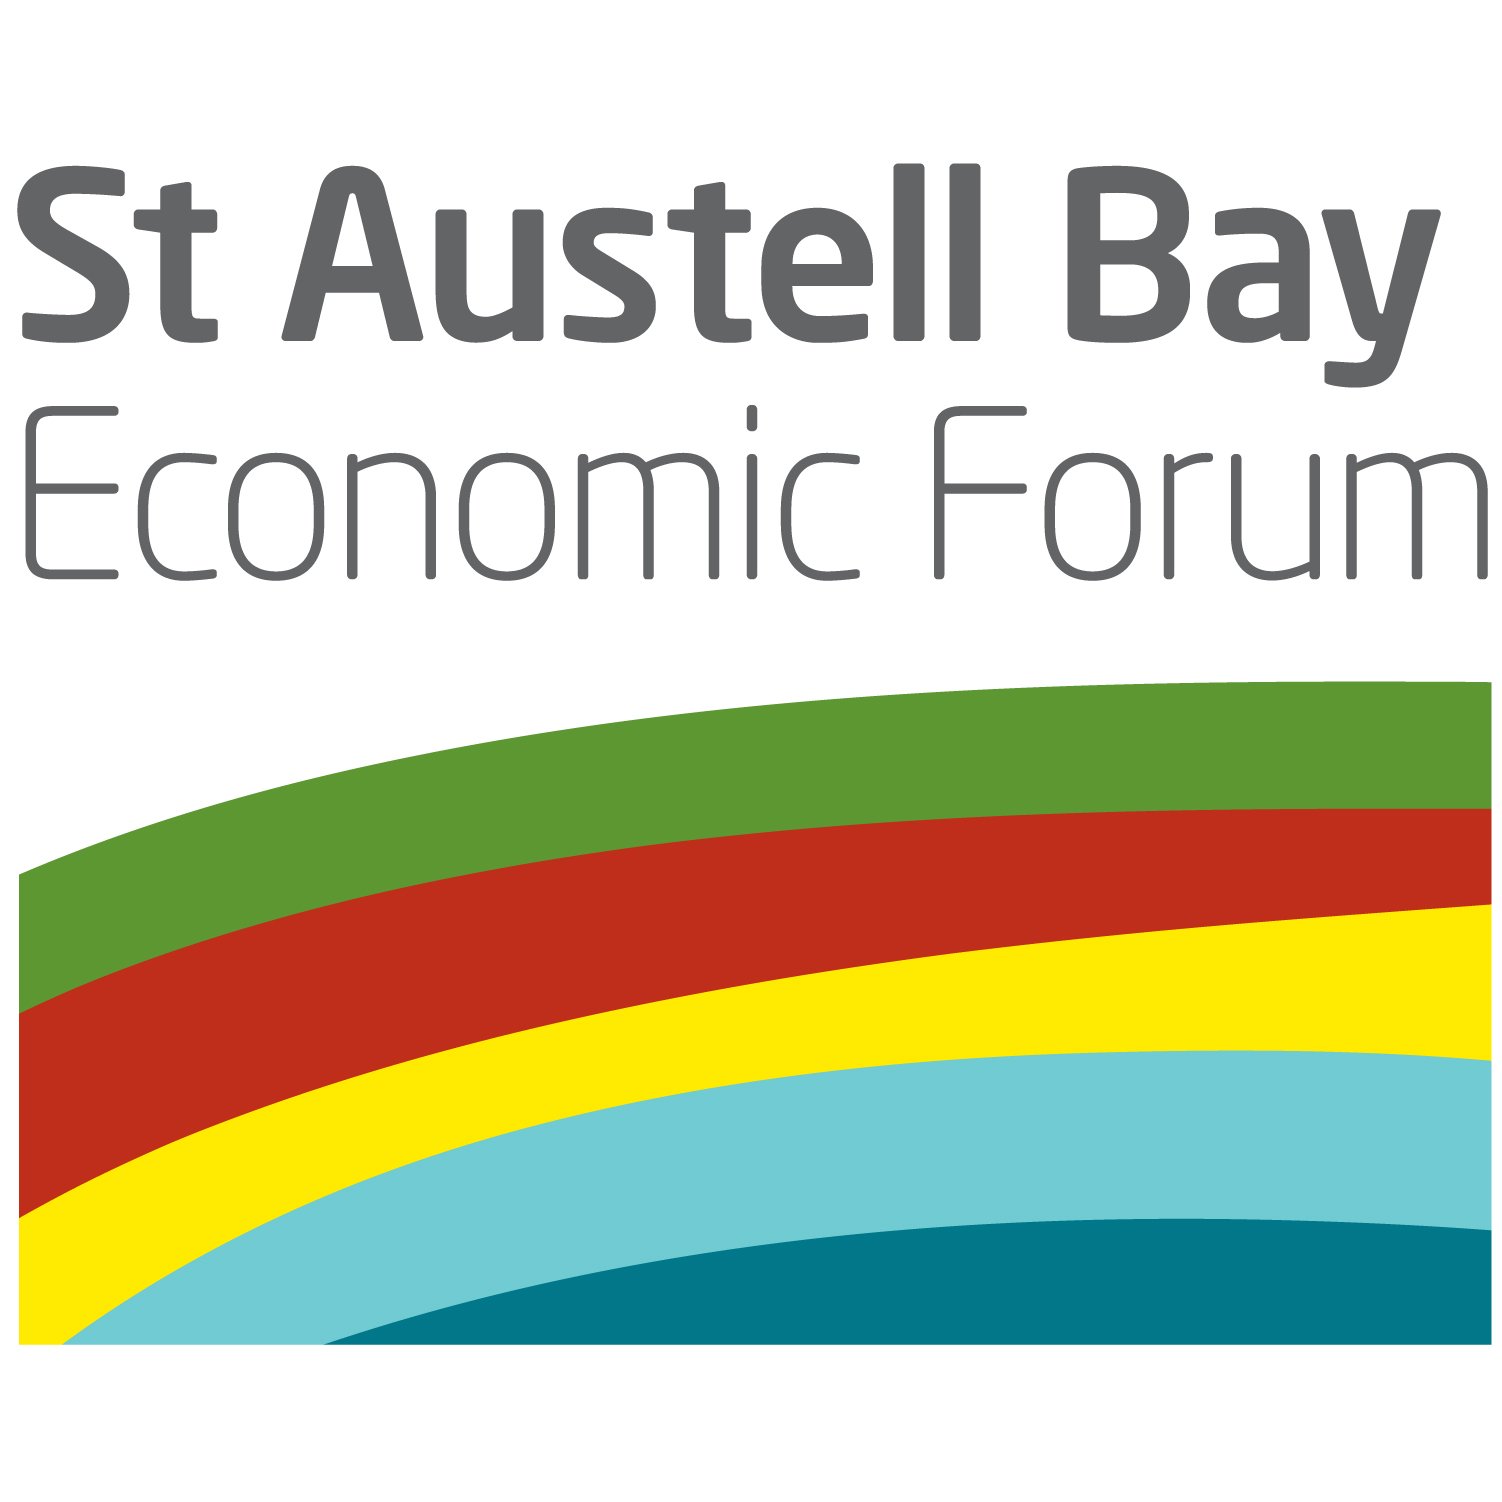 The St Austell Bay Economic Forum is a CIC formed to promote economic growth in St Austell and its hinterland.